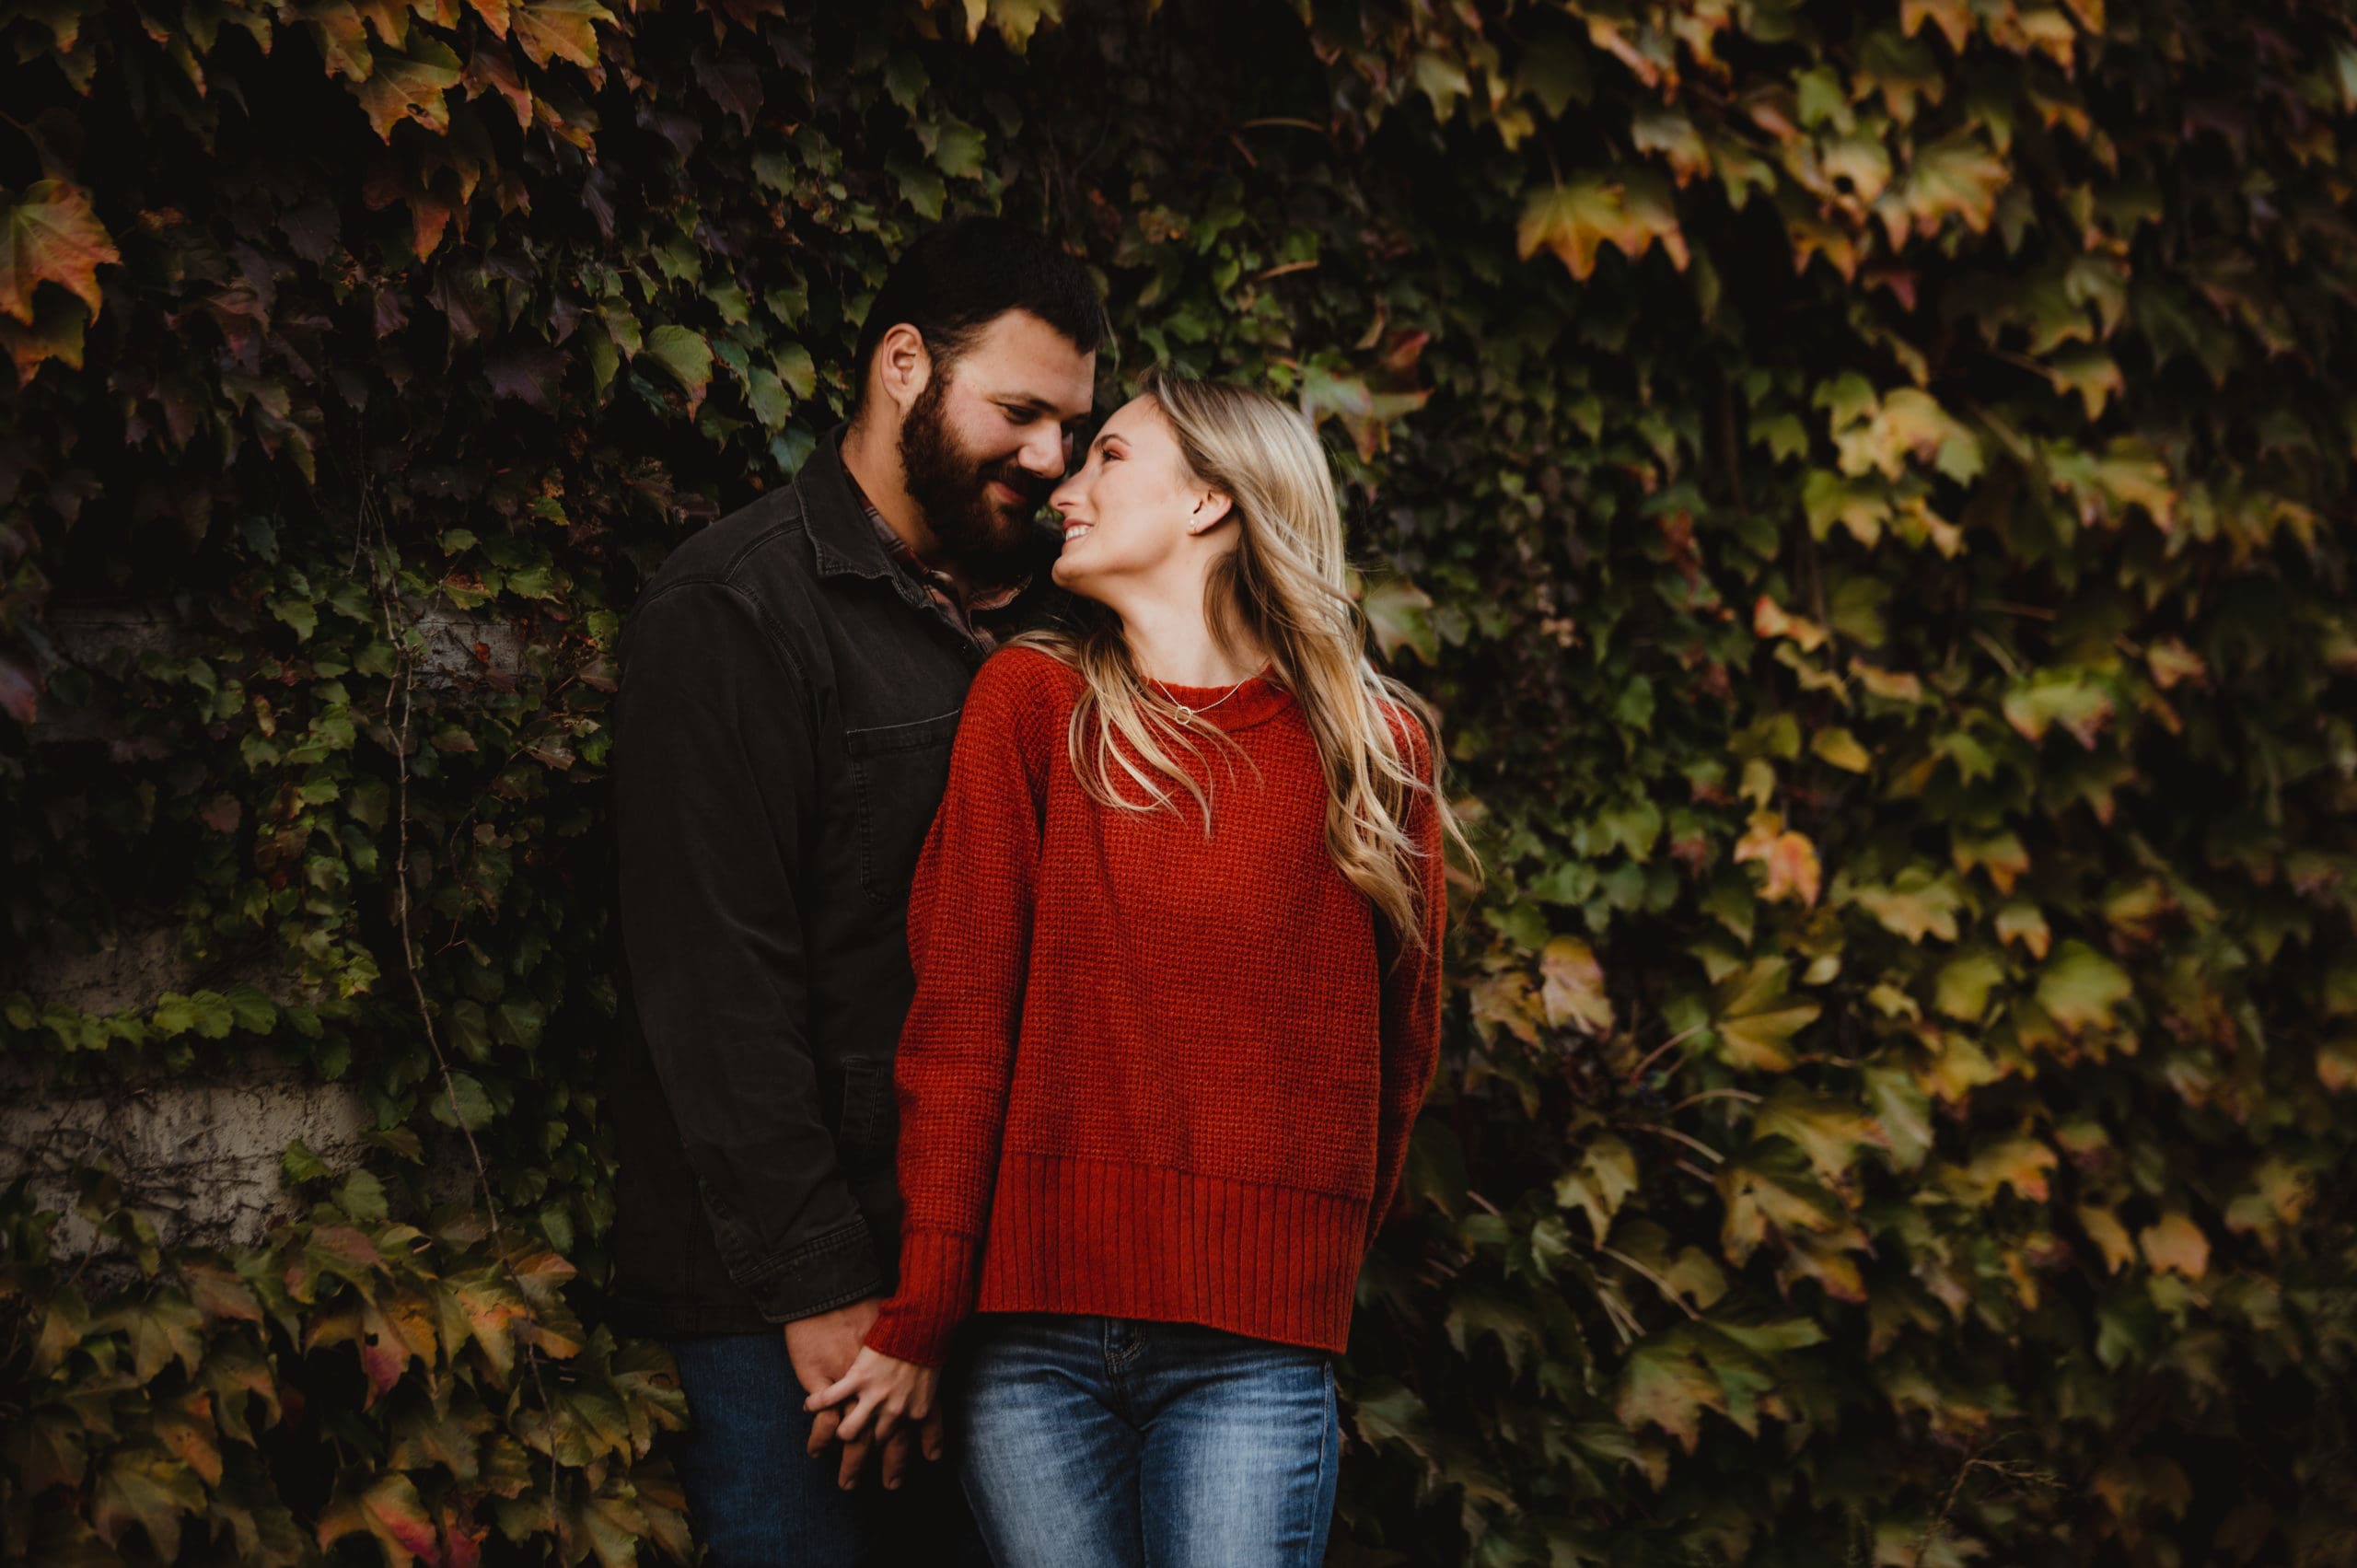 engagement session outfit suggestions